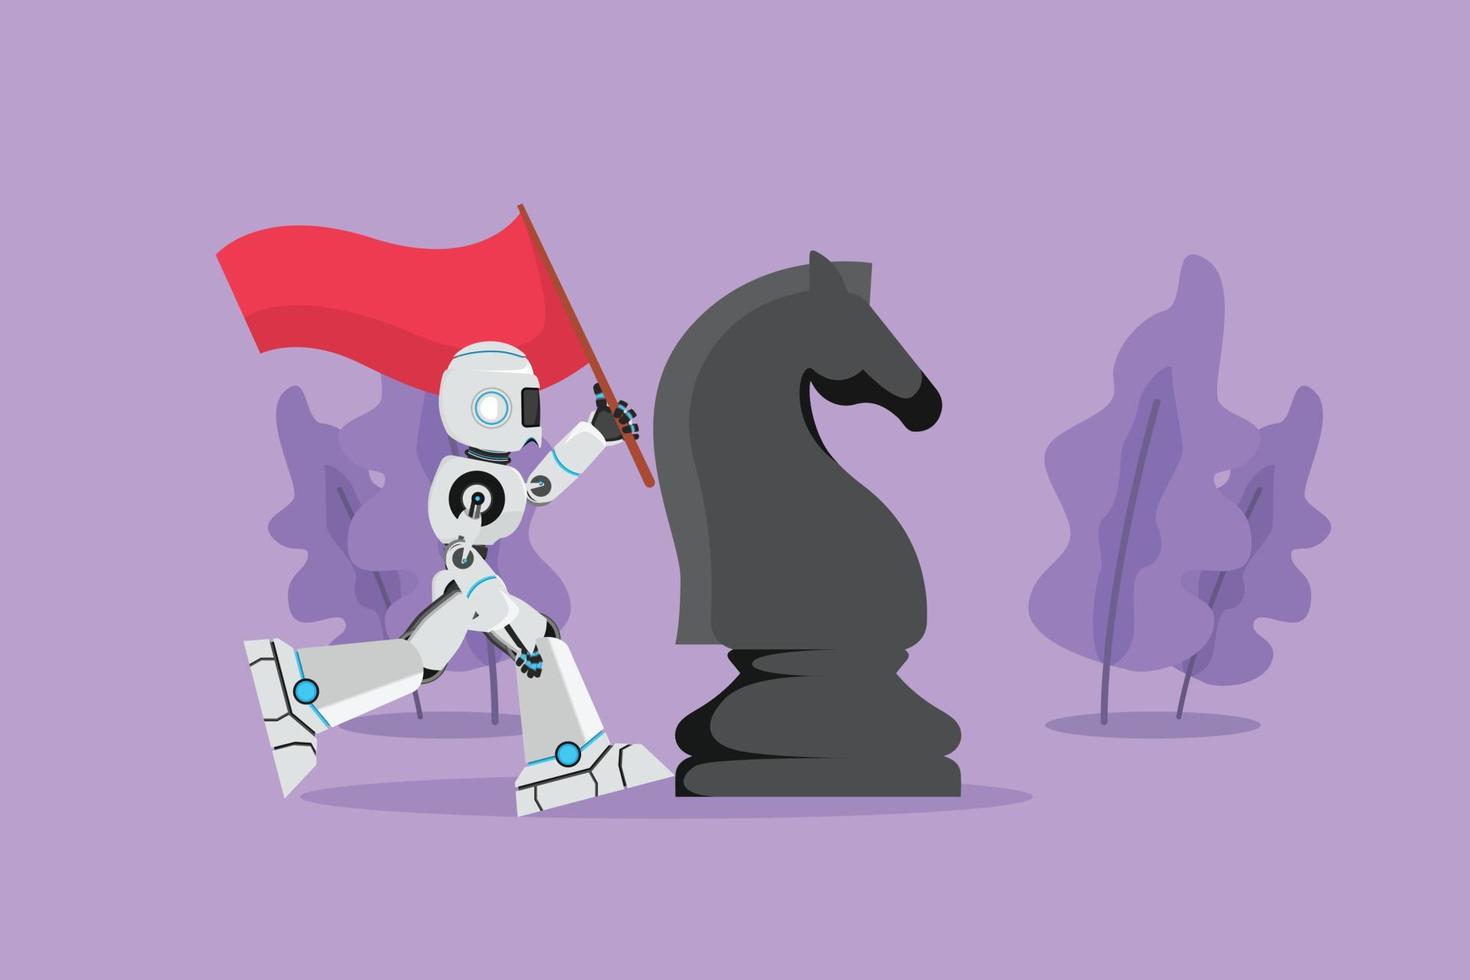 Cartoon flat style drawing robot running and holding flag beside big horse knight chess. Winning competition. Robotic artificial intelligence. Technology industry. Graphic design vector illustration